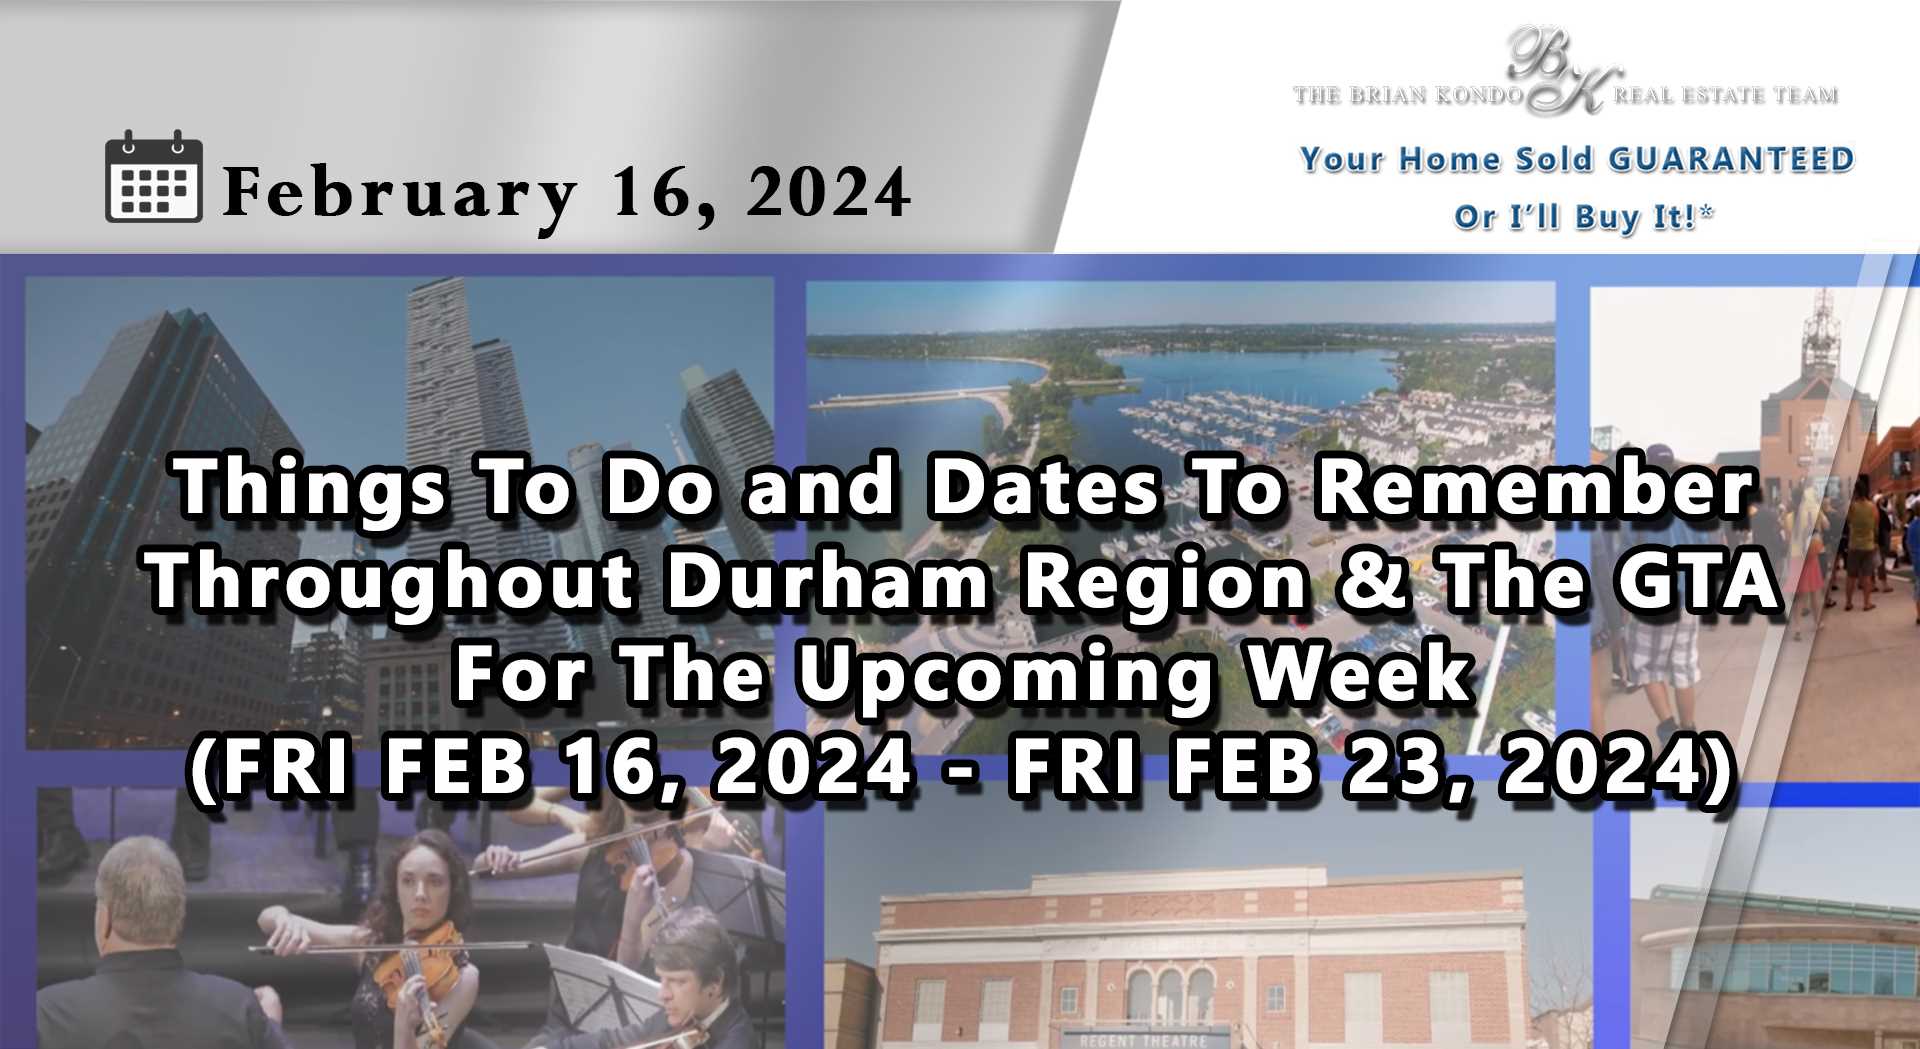 Things To Do and Dates To Remember Throughout Durham Region and The GTA For The Upcoming Week (FRI FEB 16, 2024 - FRI FEB 23, 2024)